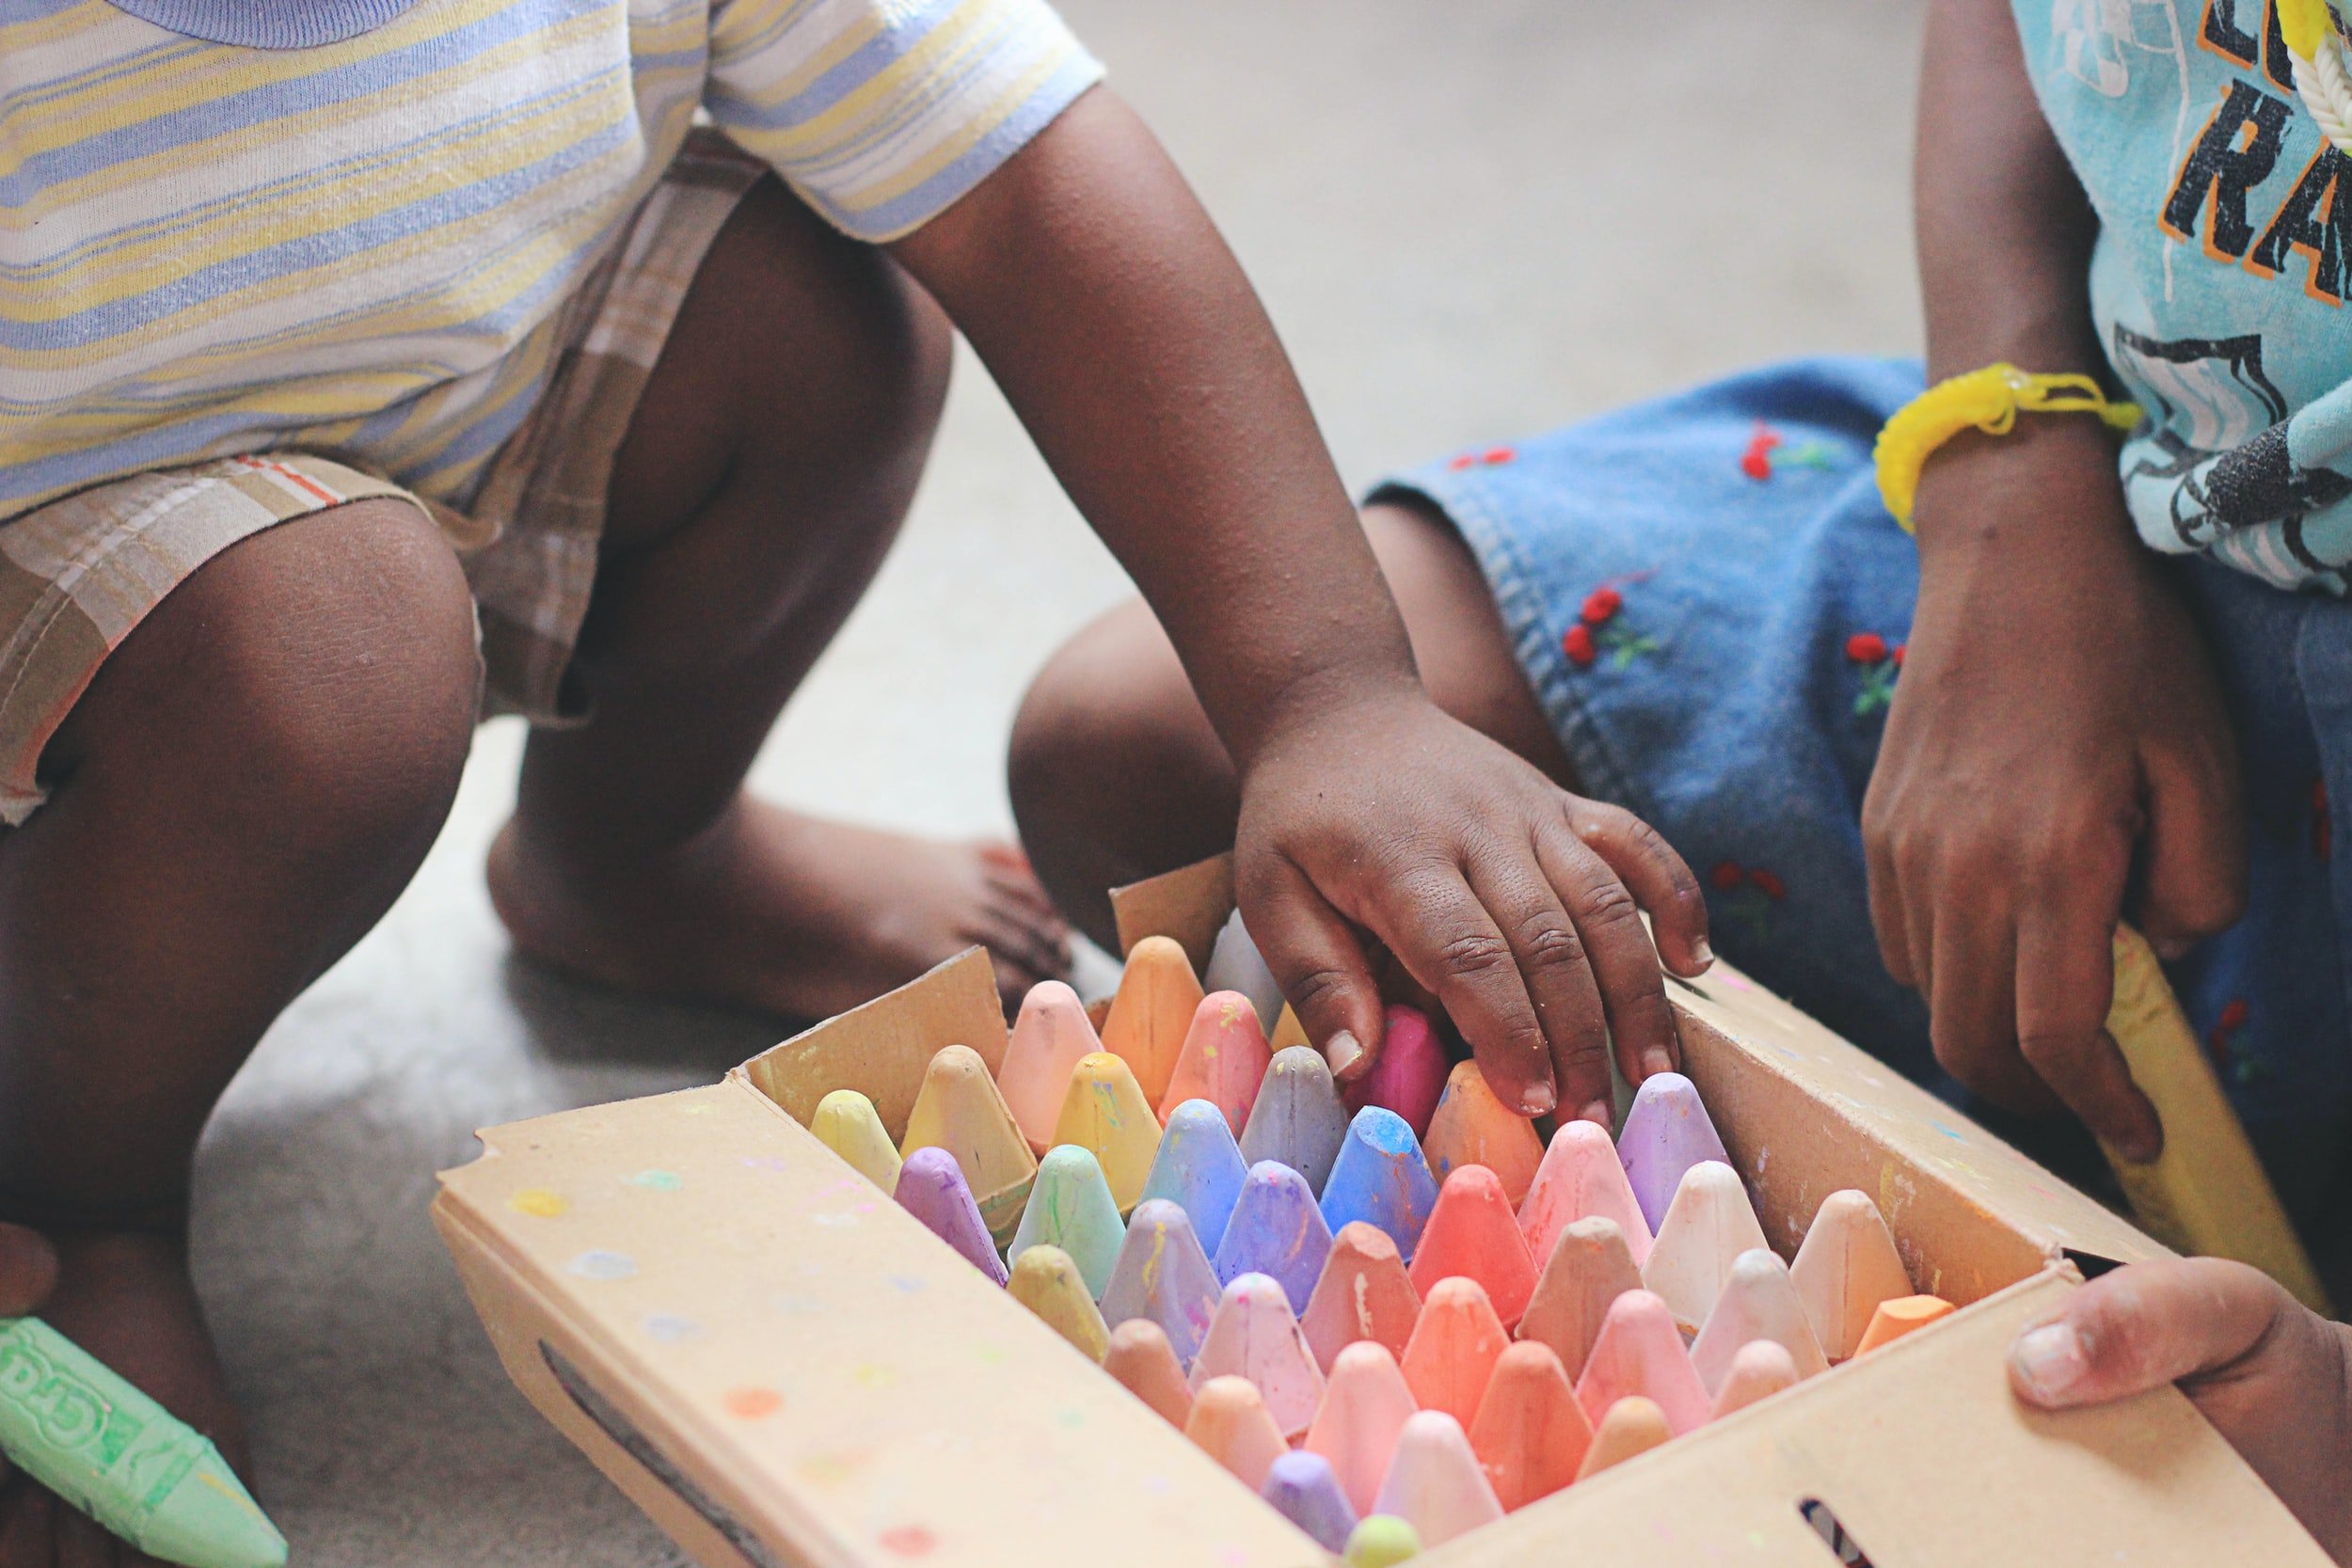 Upskilling in early childhood education